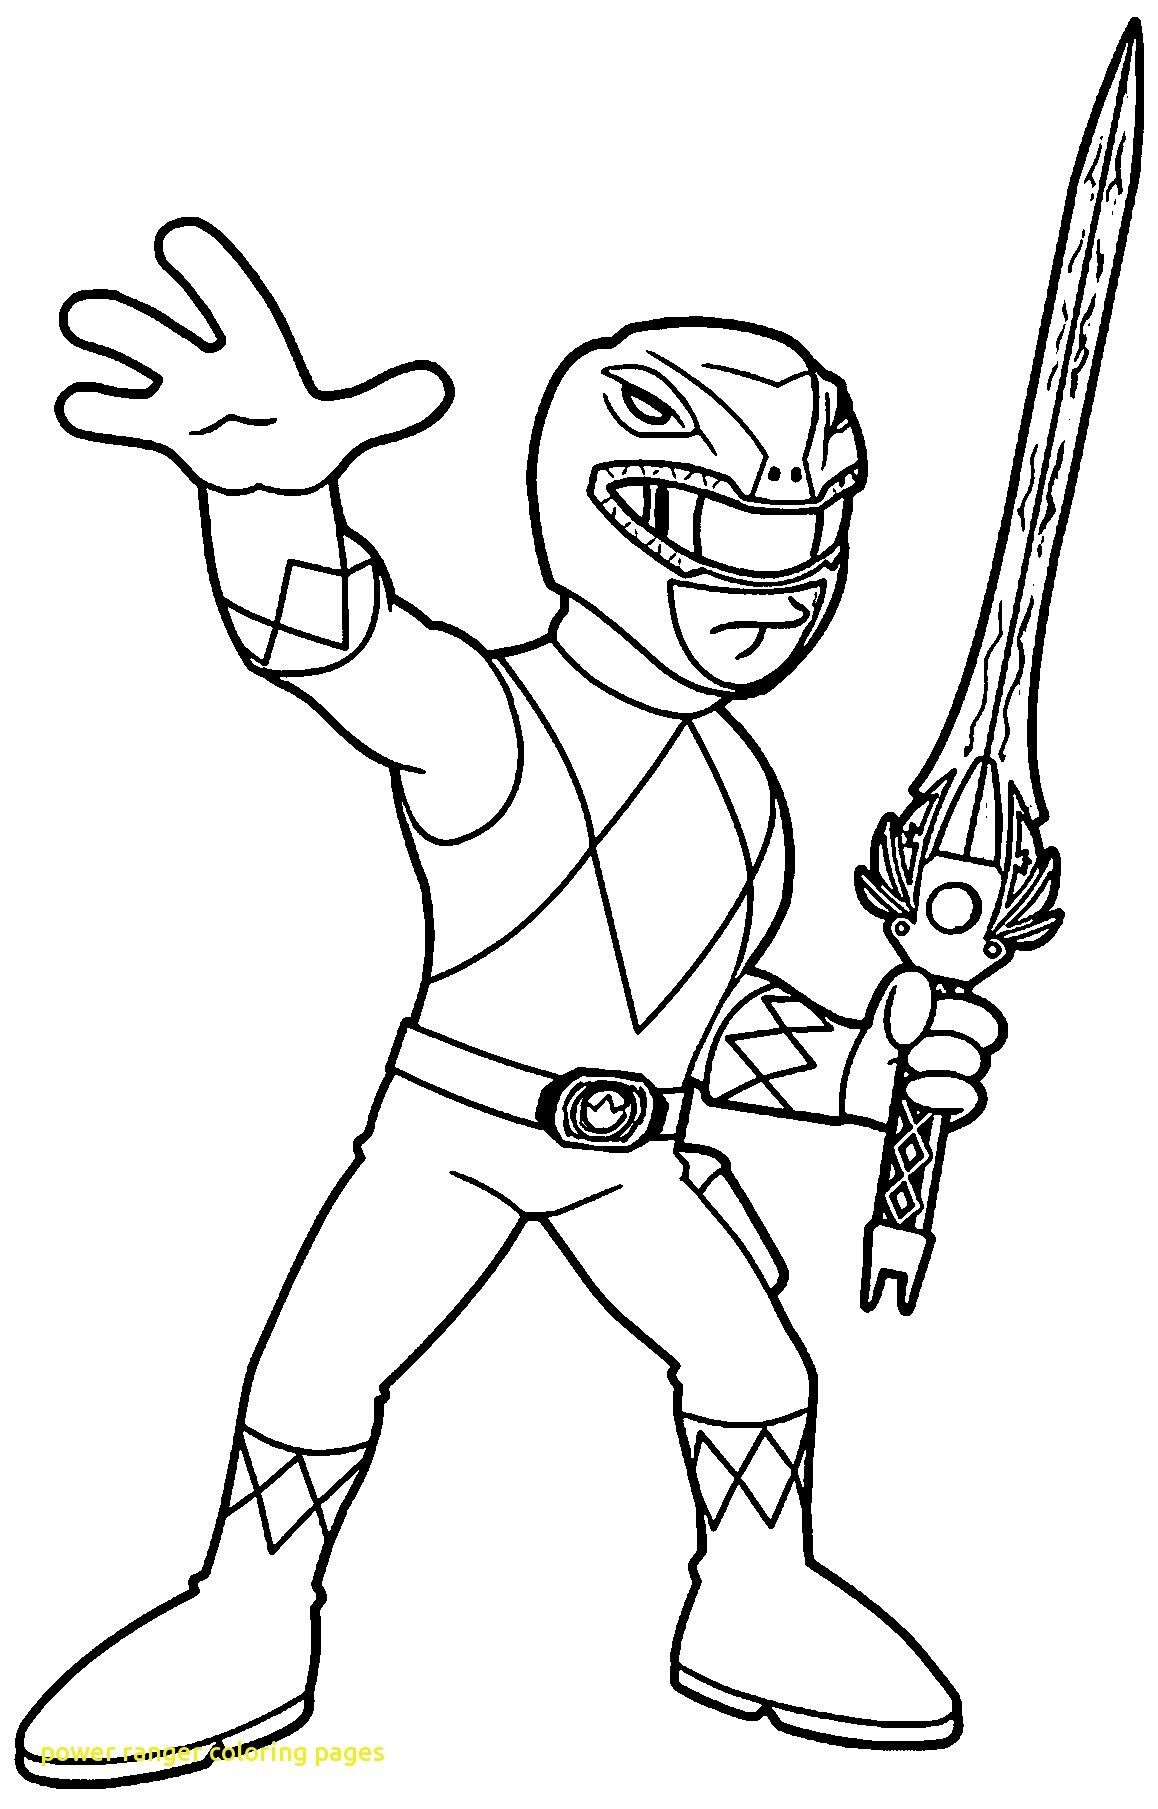 50 Mighty Morphin Power Rangers Coloring Pages Nt5w